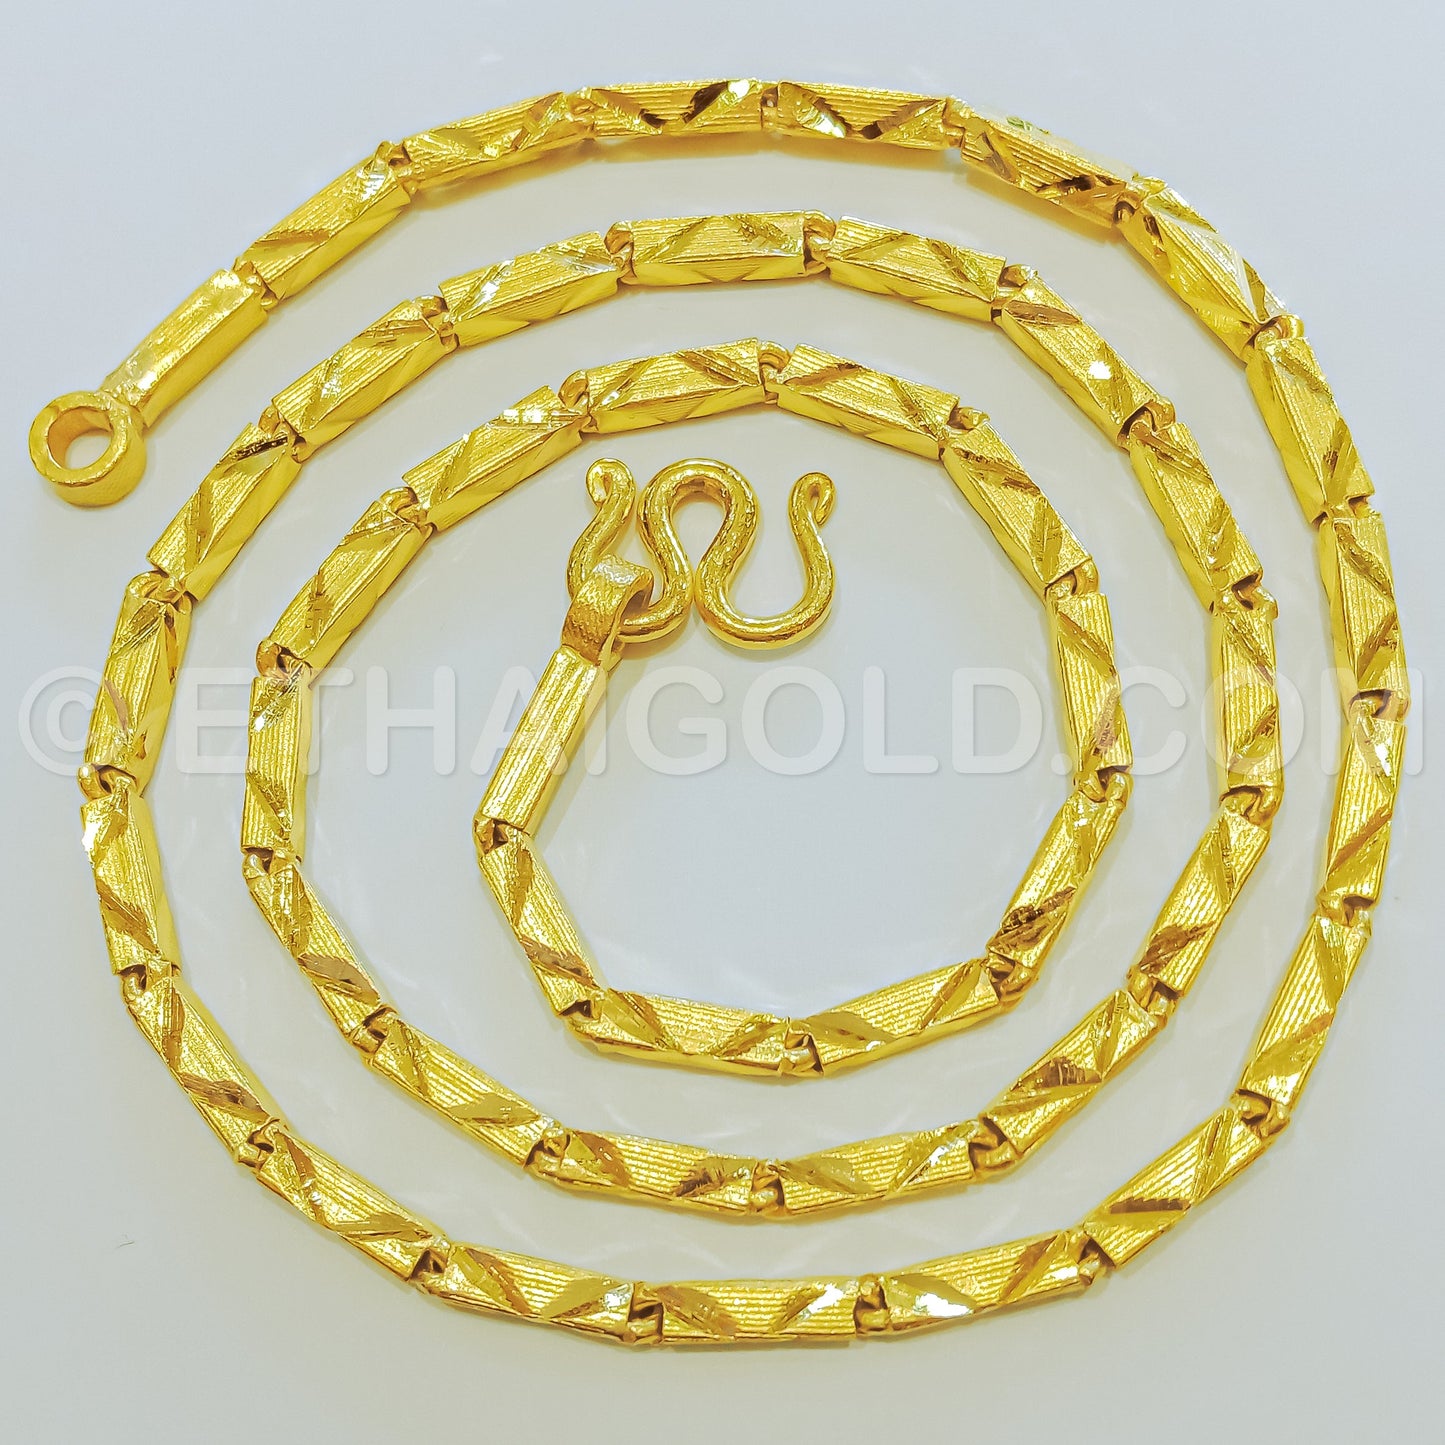 1 BAHT MATTE DIAMOND-CUT SOLID SQUARE BARREL CHAIN NECKLACE IN 23K GOLD (ID: N2001B)